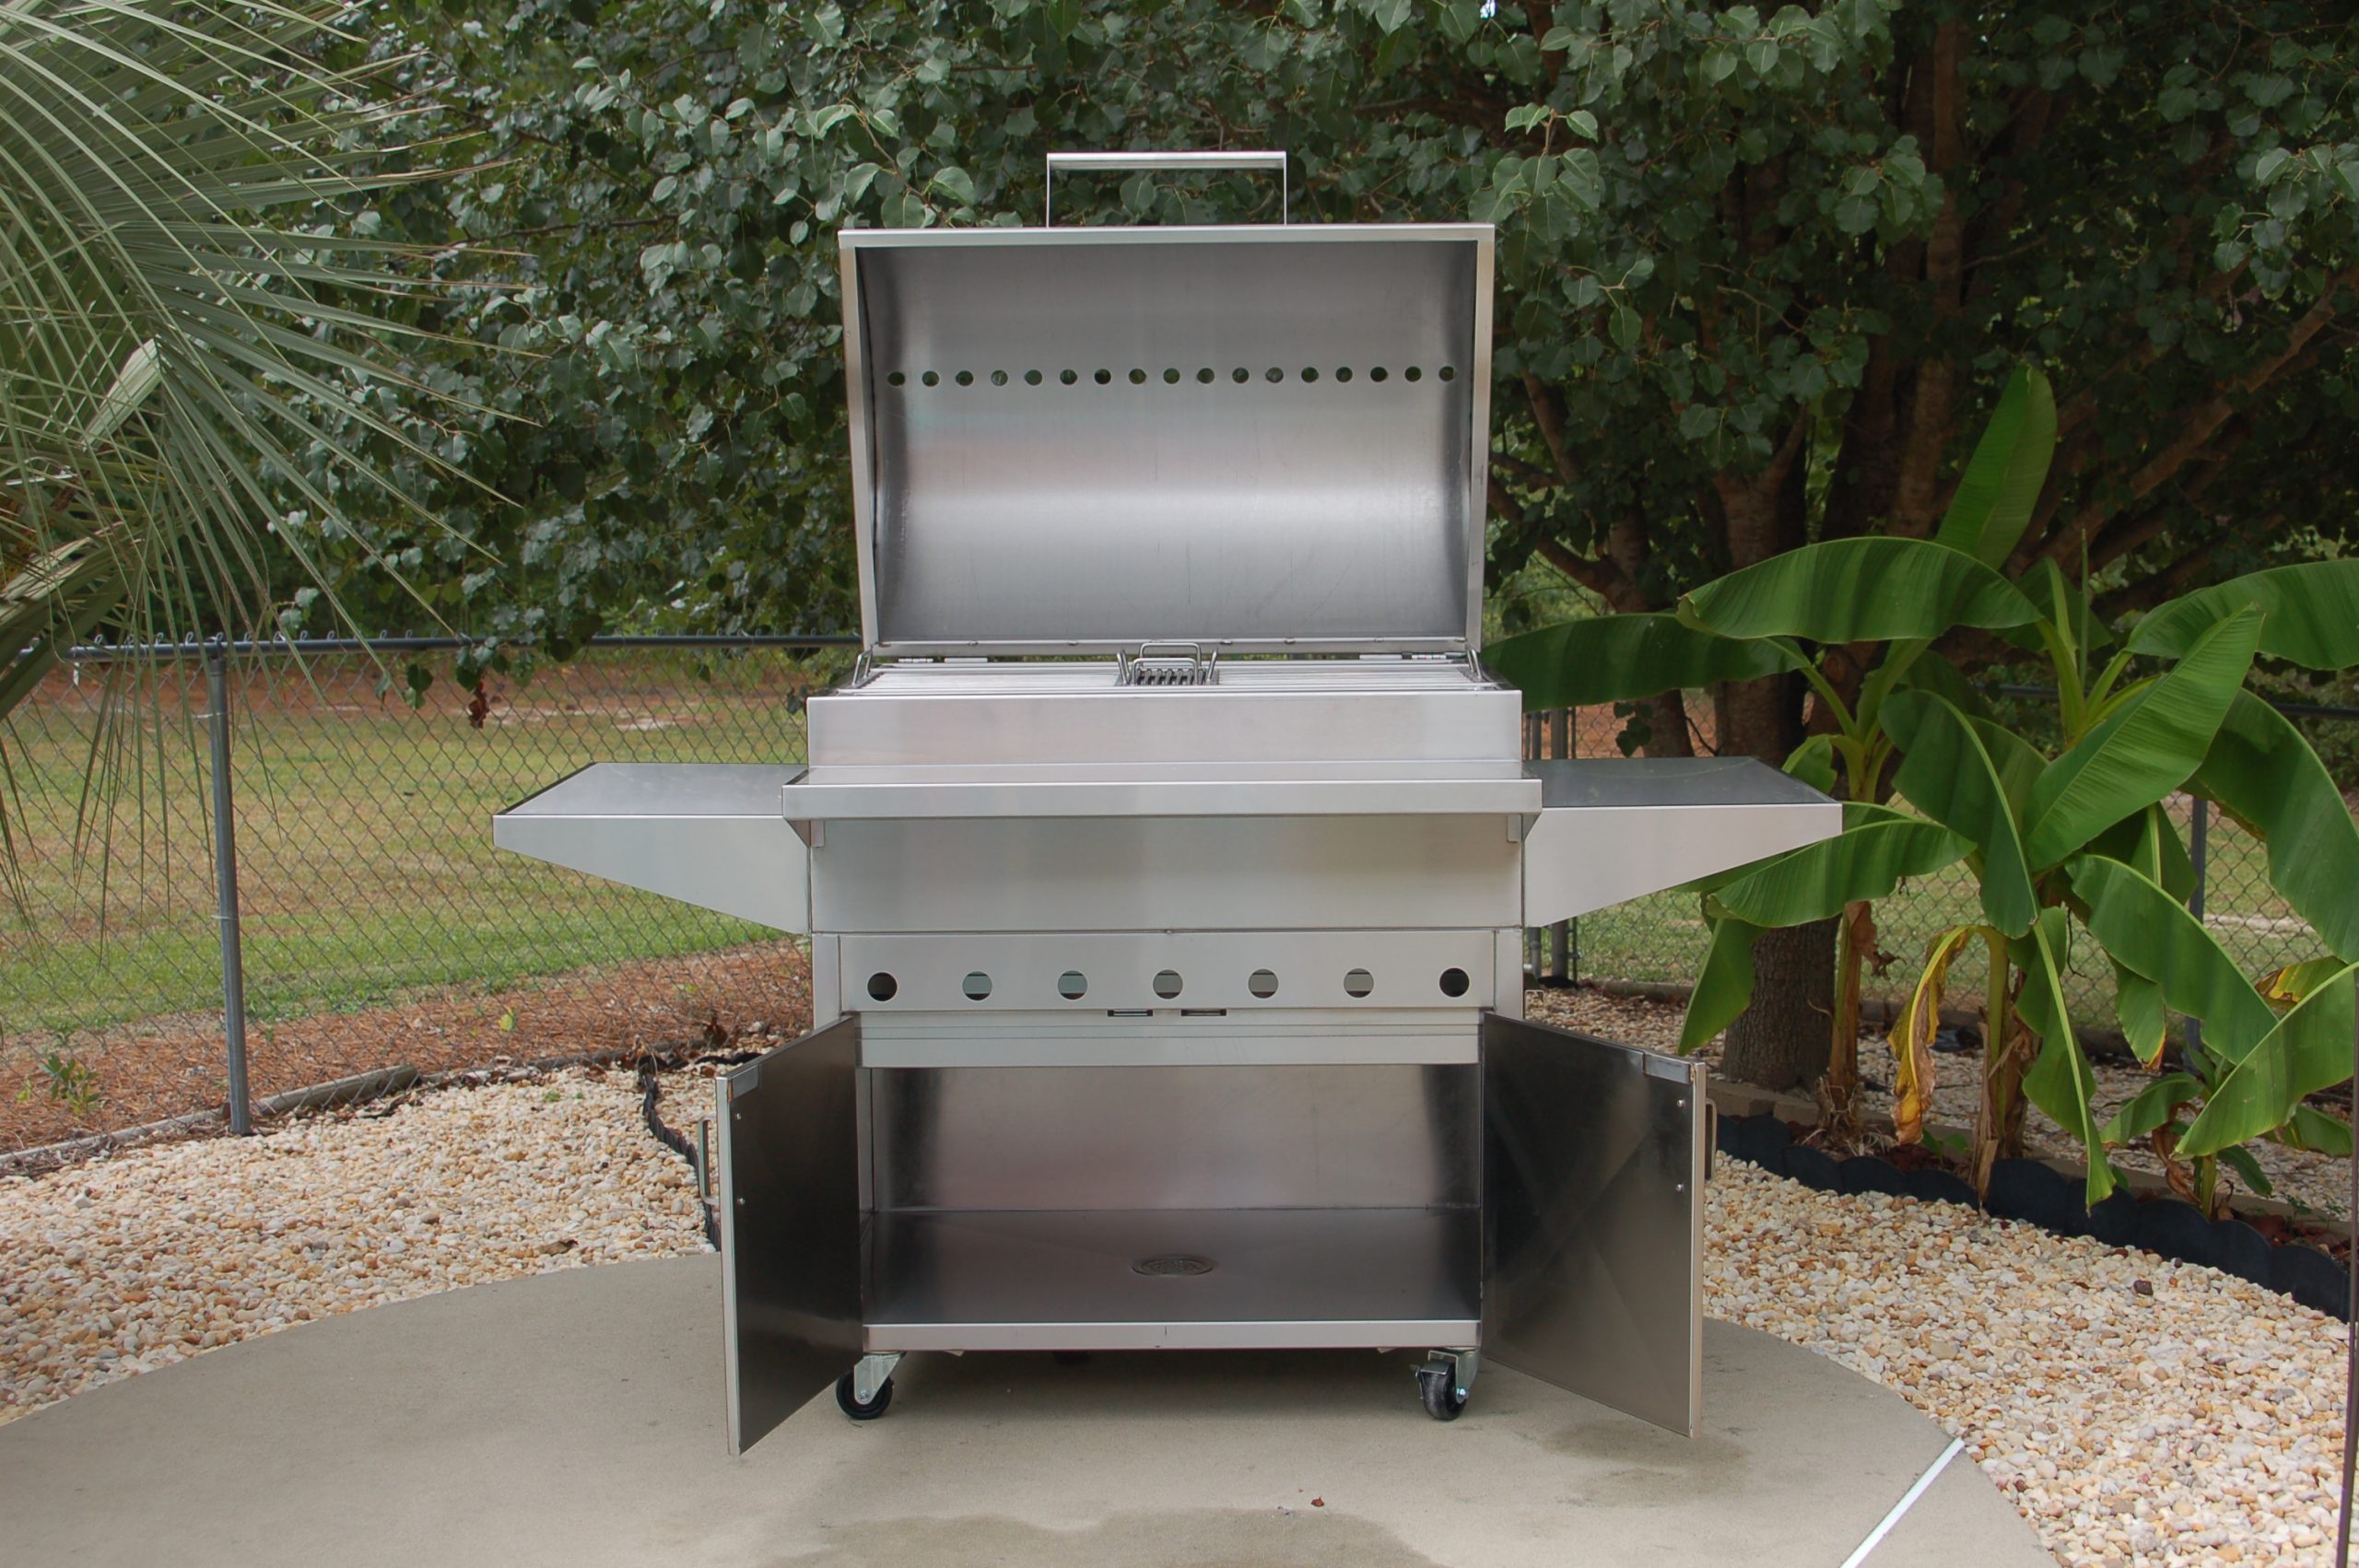 Why Stainless Steel is the best choice when constructing or remodeling an outdoor kitchen!